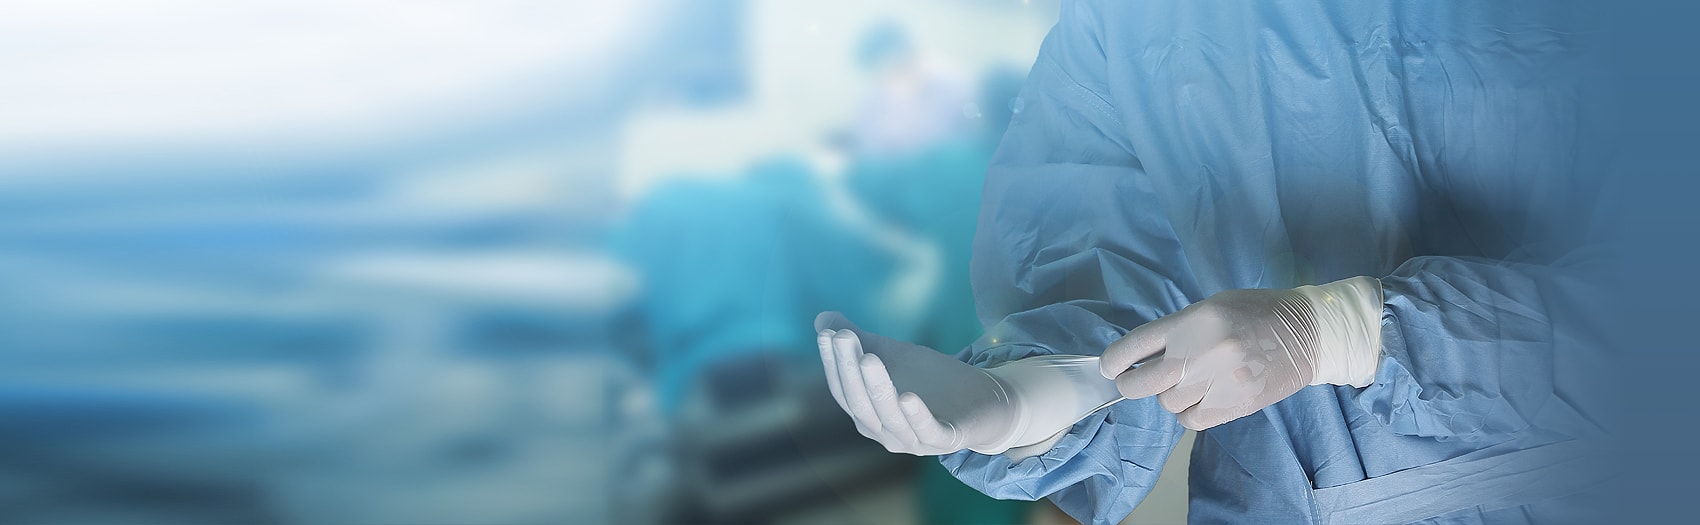 surgery banner image